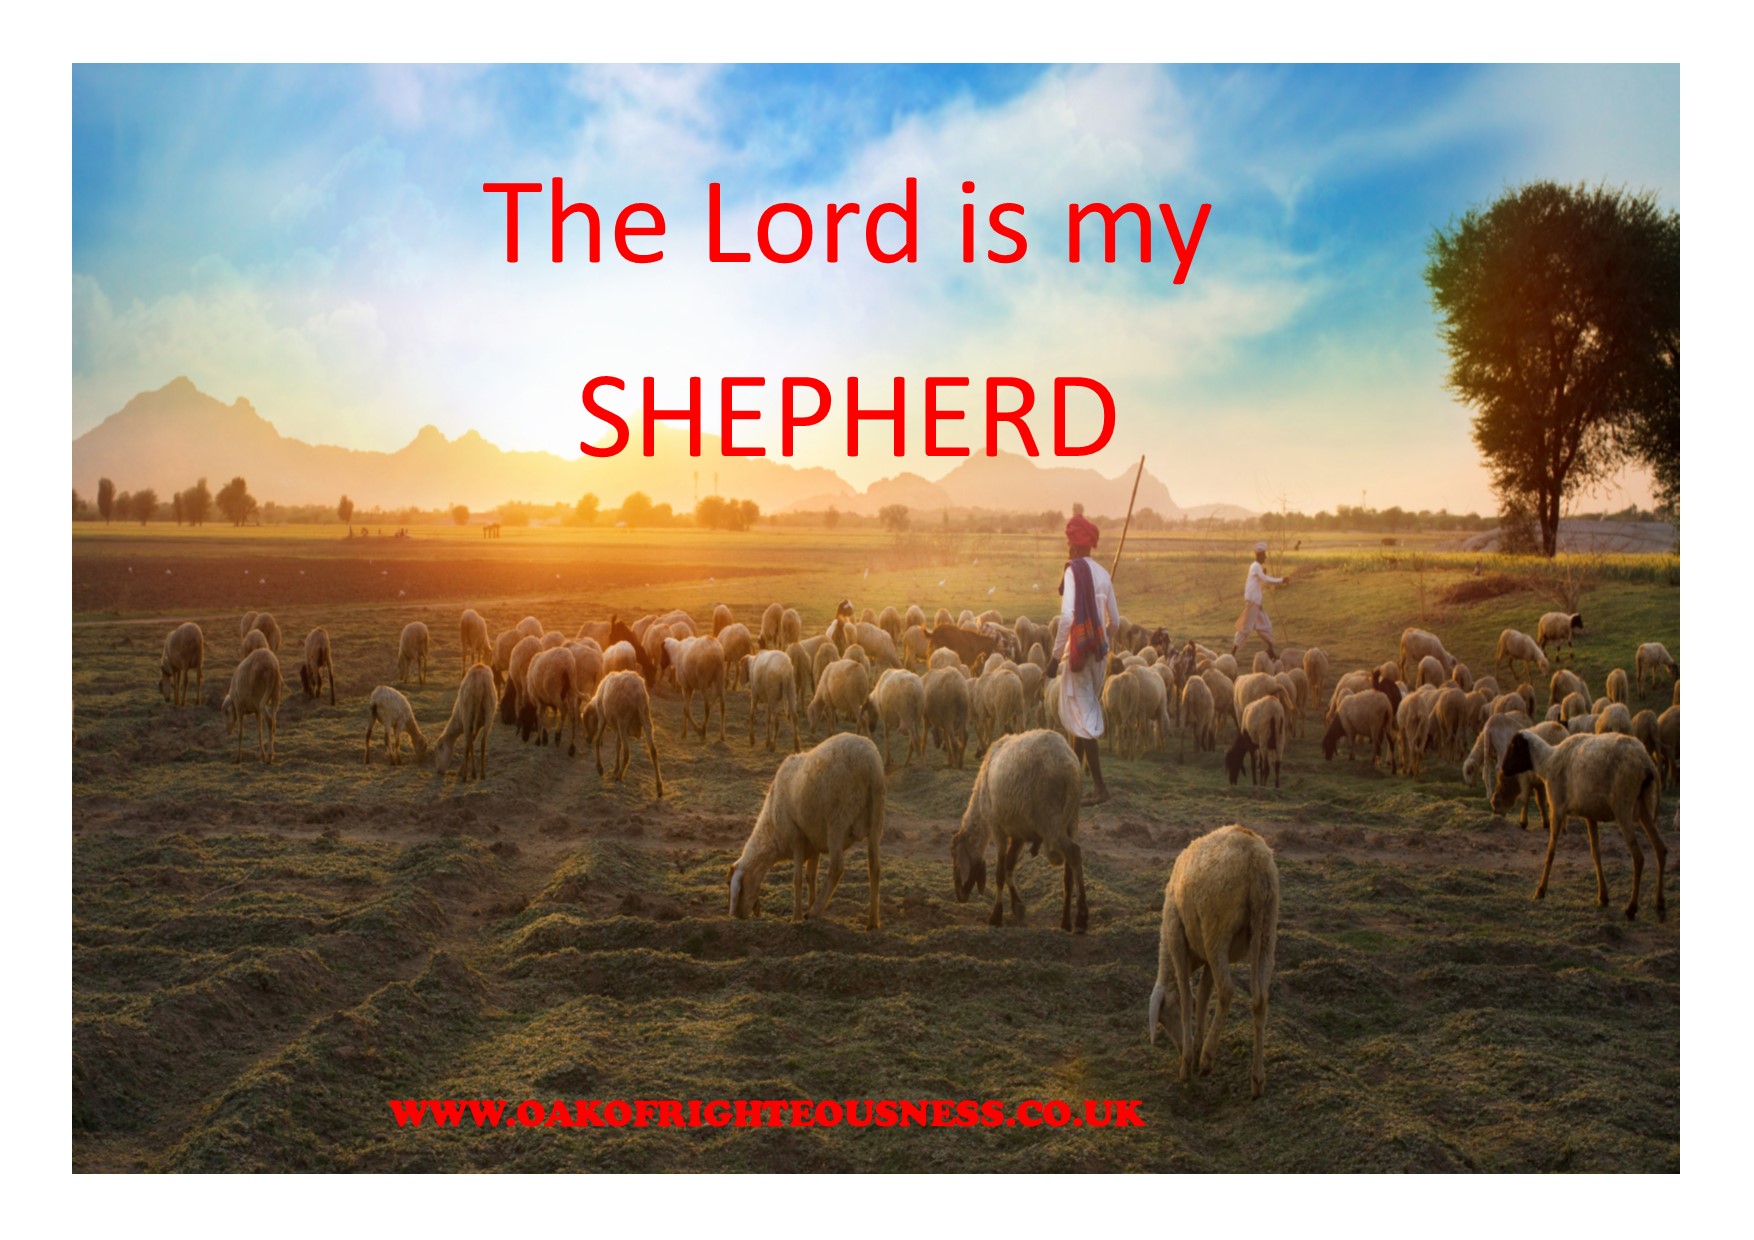 The Lord is my SHEPHERD - GCL